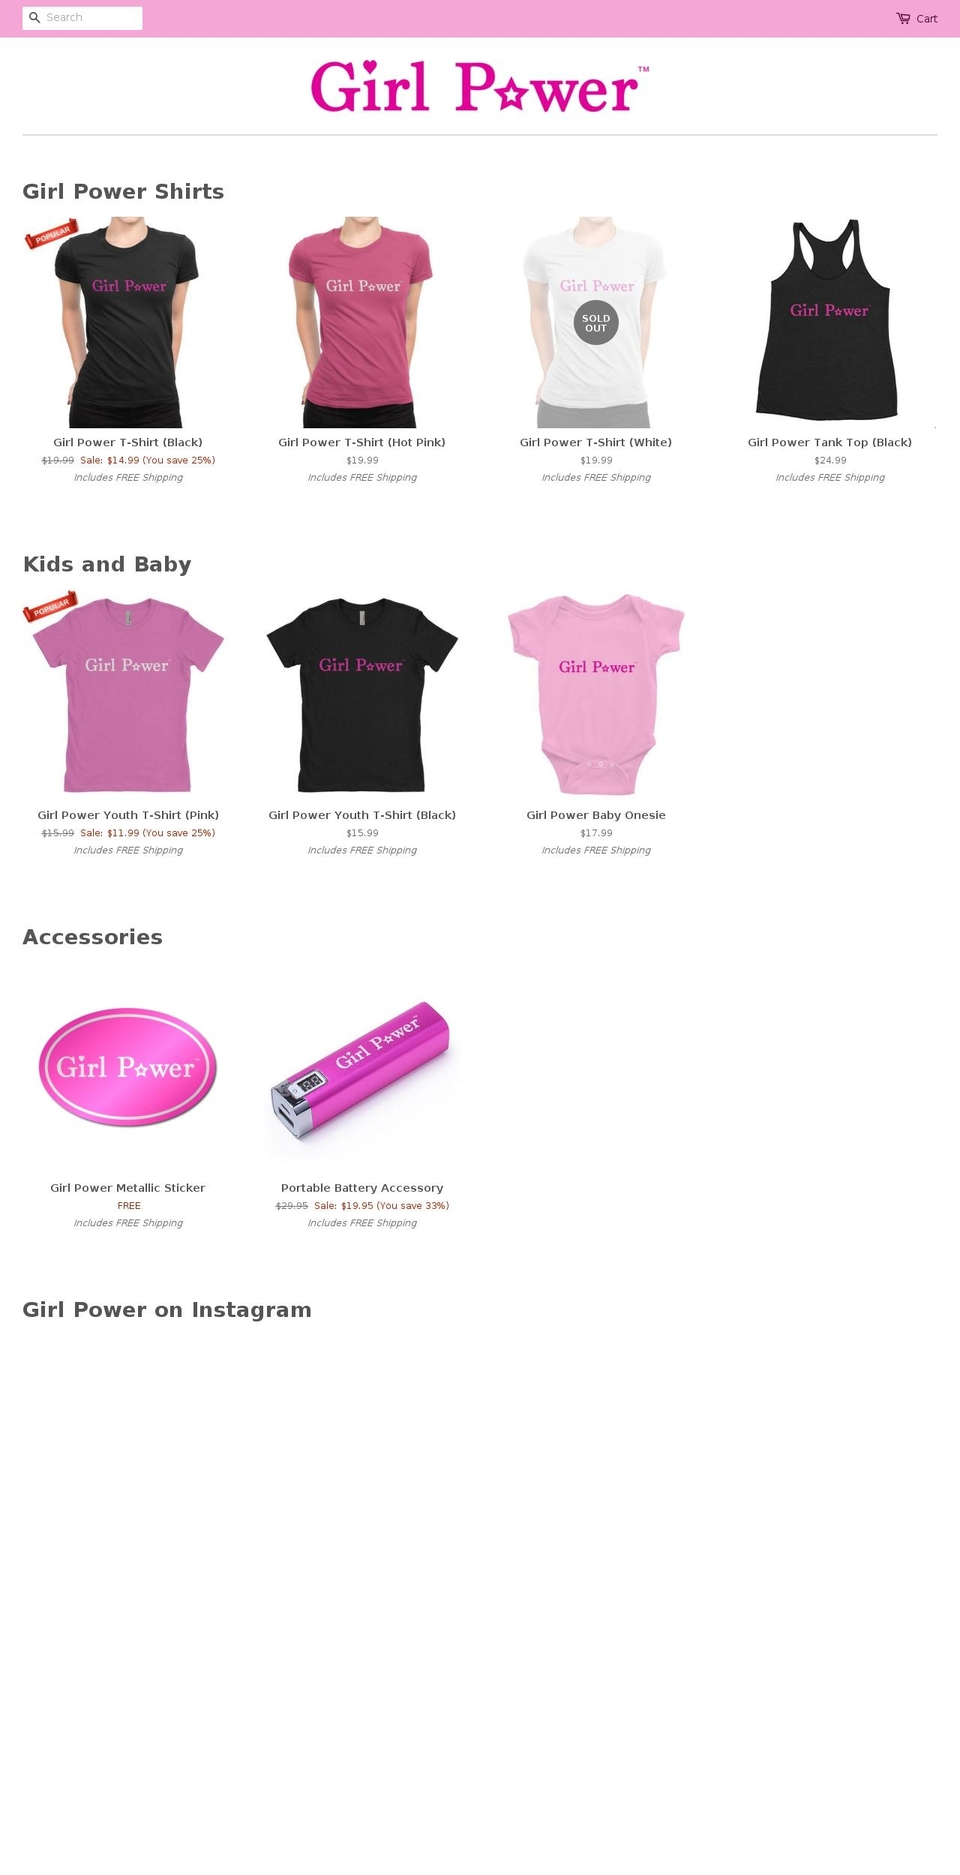 FASTOR Shopify theme site example girlpoweraccessories.com